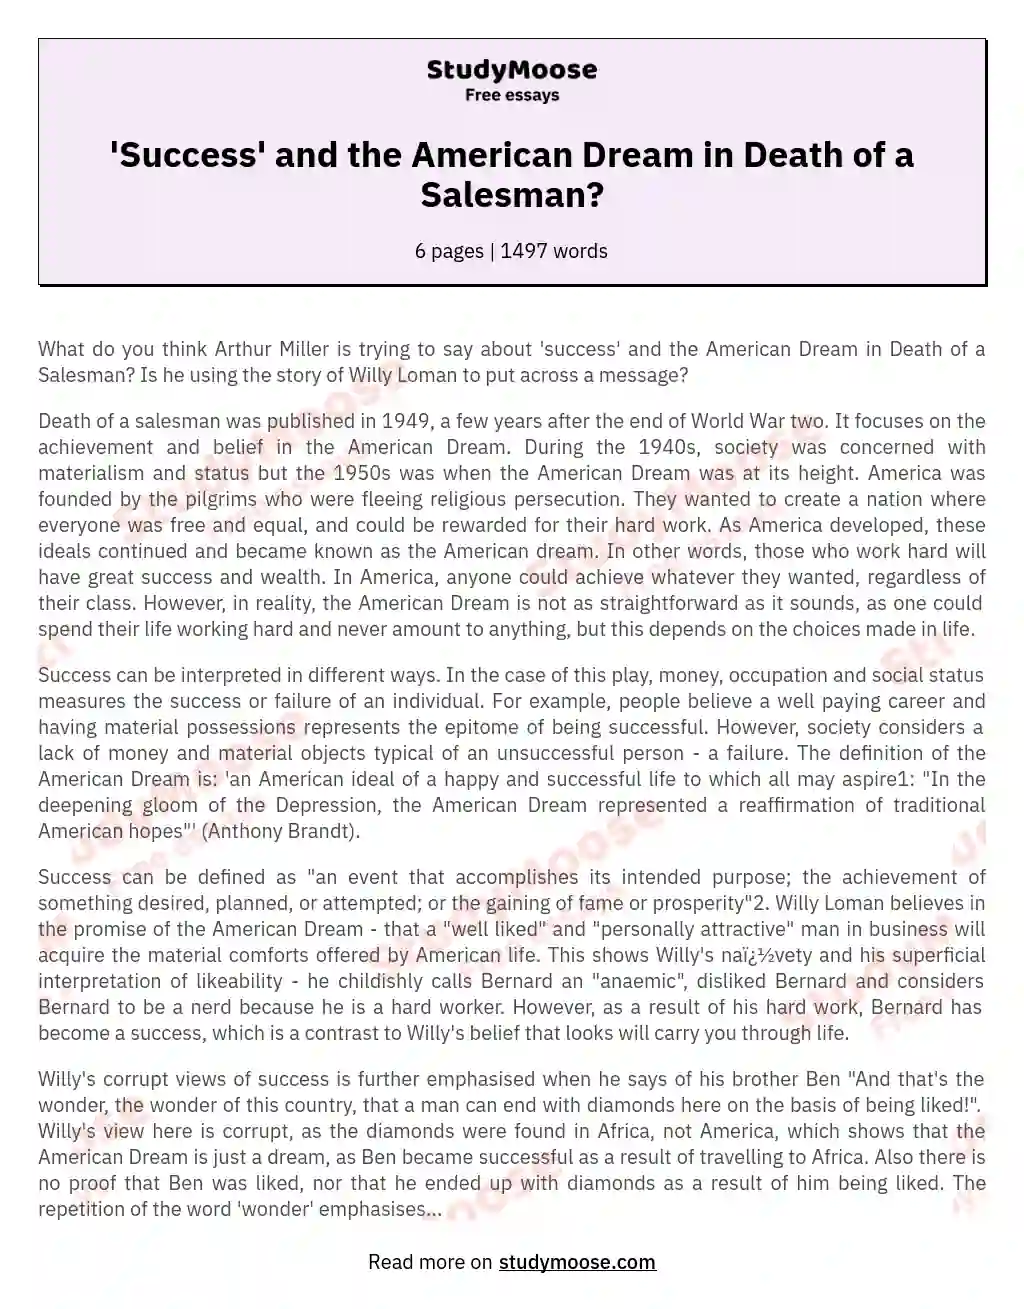 'Success' and the American Dream in Death of a Salesman?